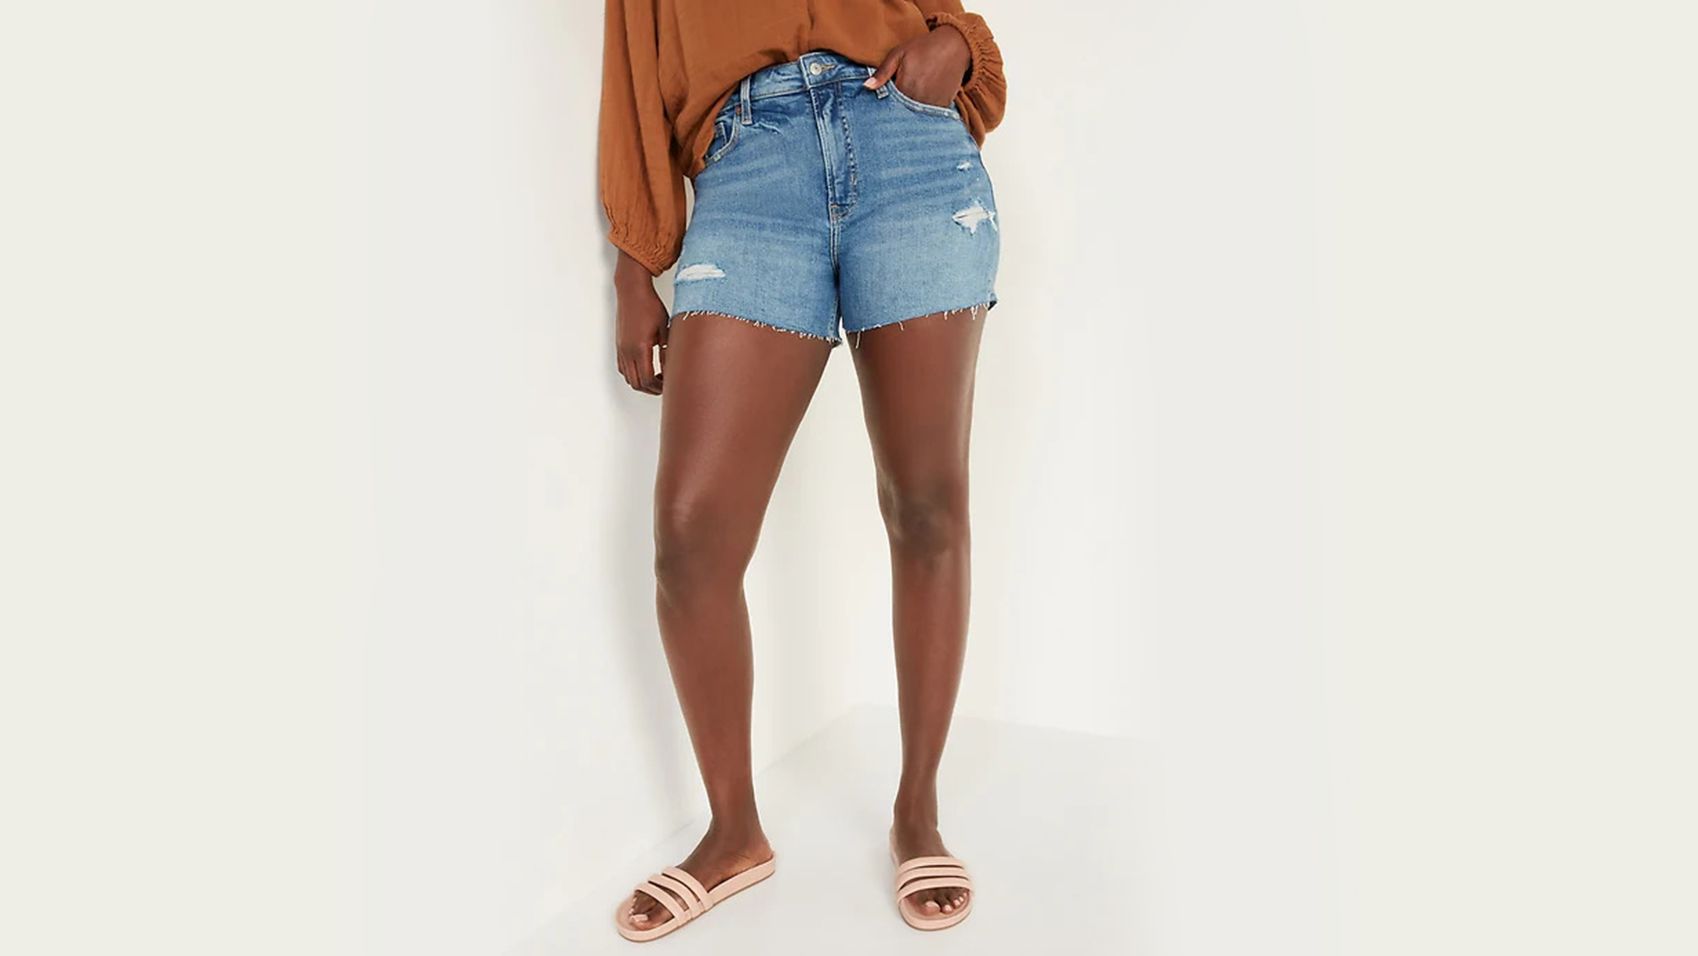 High-Waisted Ripped Black Non-Stretch Jean Shorts for Girls